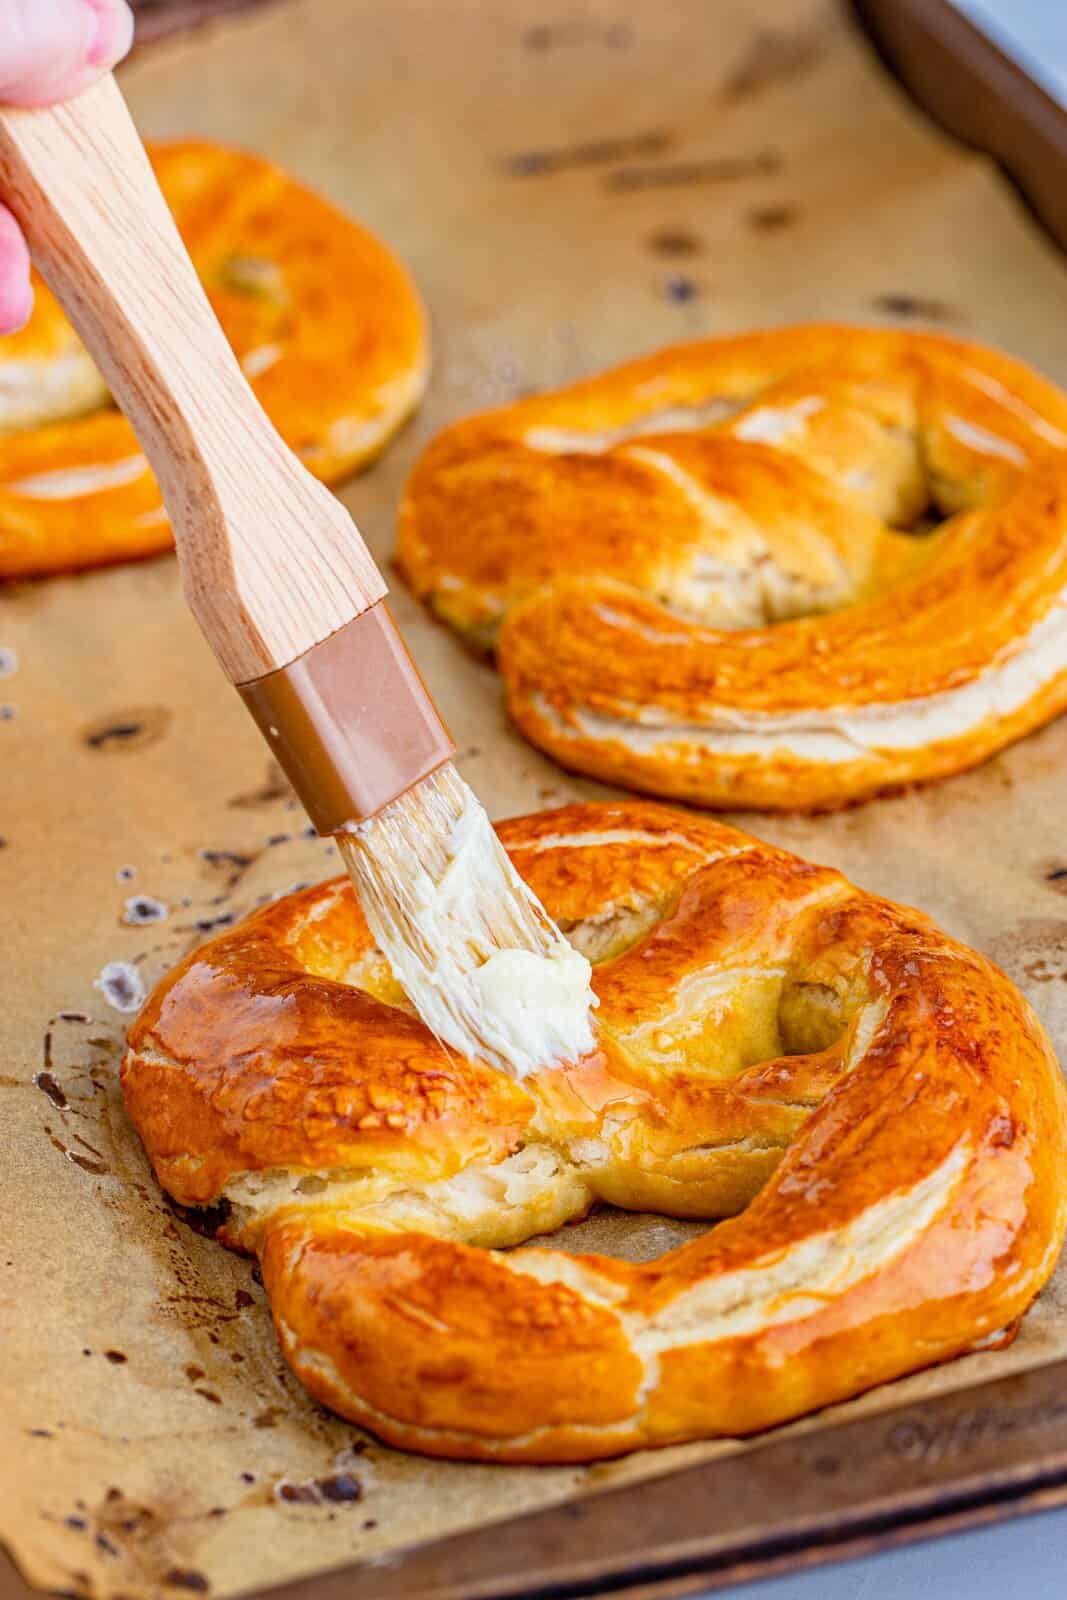 Finished pretzels being brushed with butter.